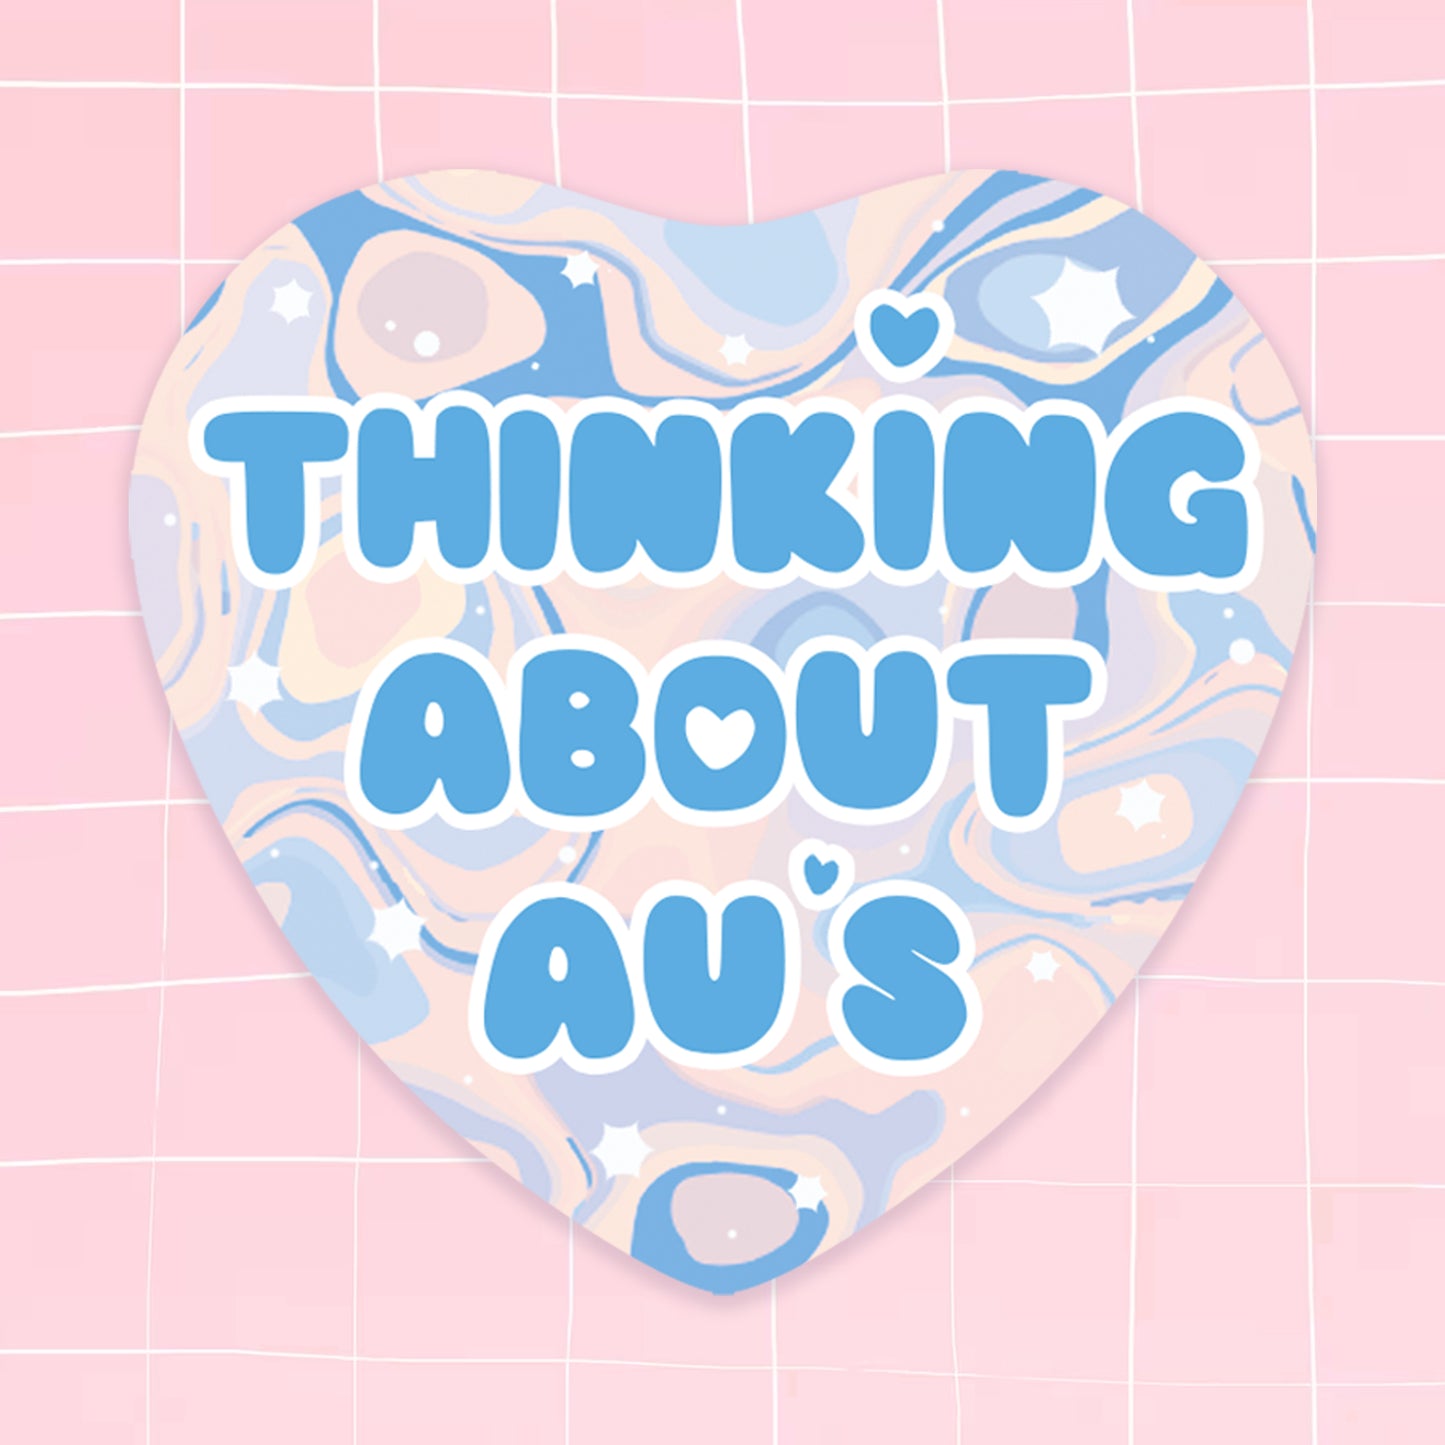 AUs Holographic Heart Badge Pin